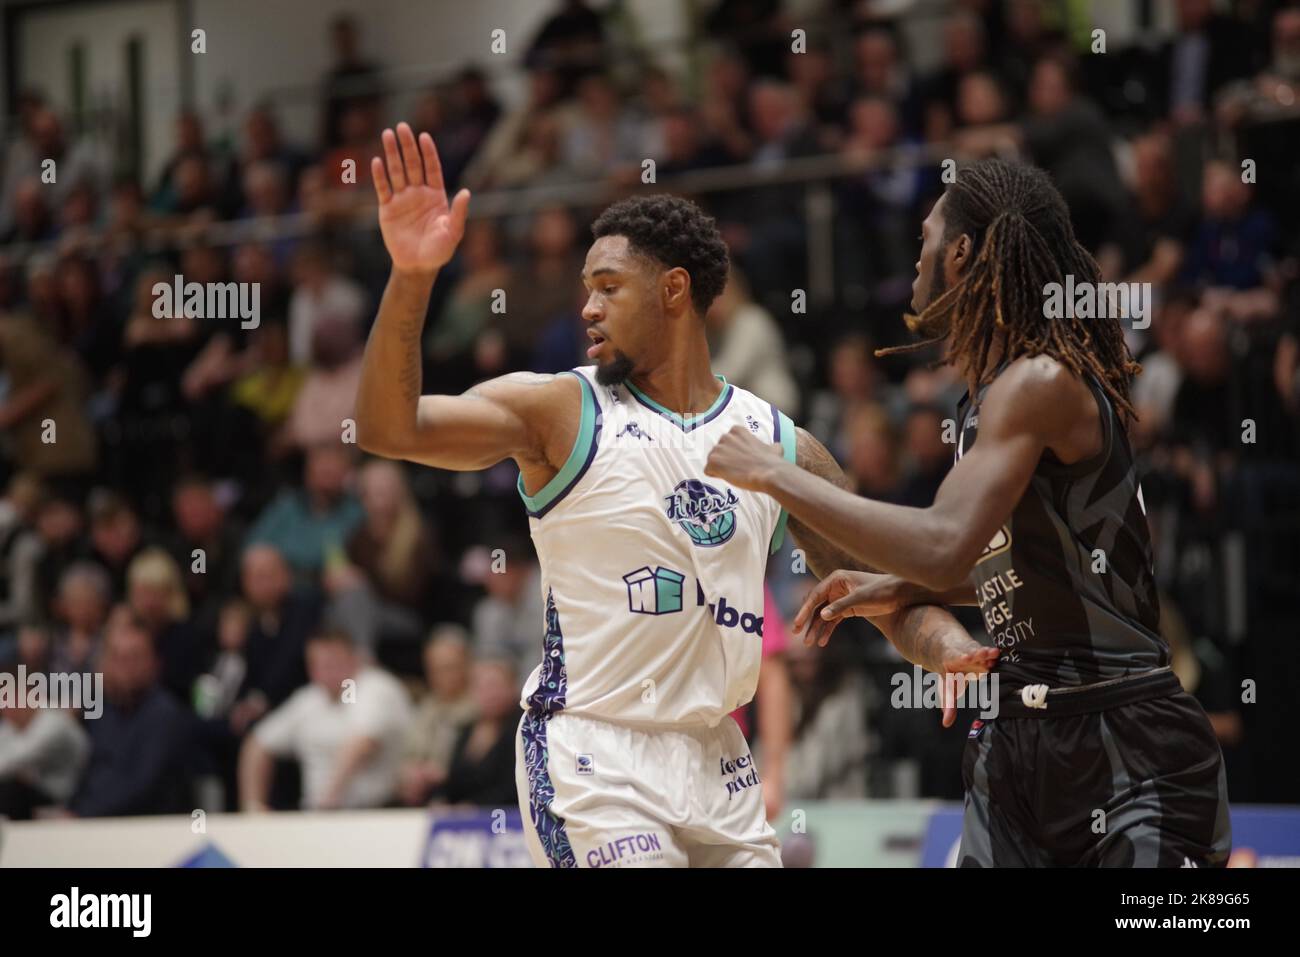 Newcastle, England, 7 October 2022. Vincent King and Lesley Varner playing for Bristol Flyers and Newcastle Eagles in a BBL Championship match at the Vertu Motors Arena. Credit: Colin Edwards/Alamy Live News. Stock Photo